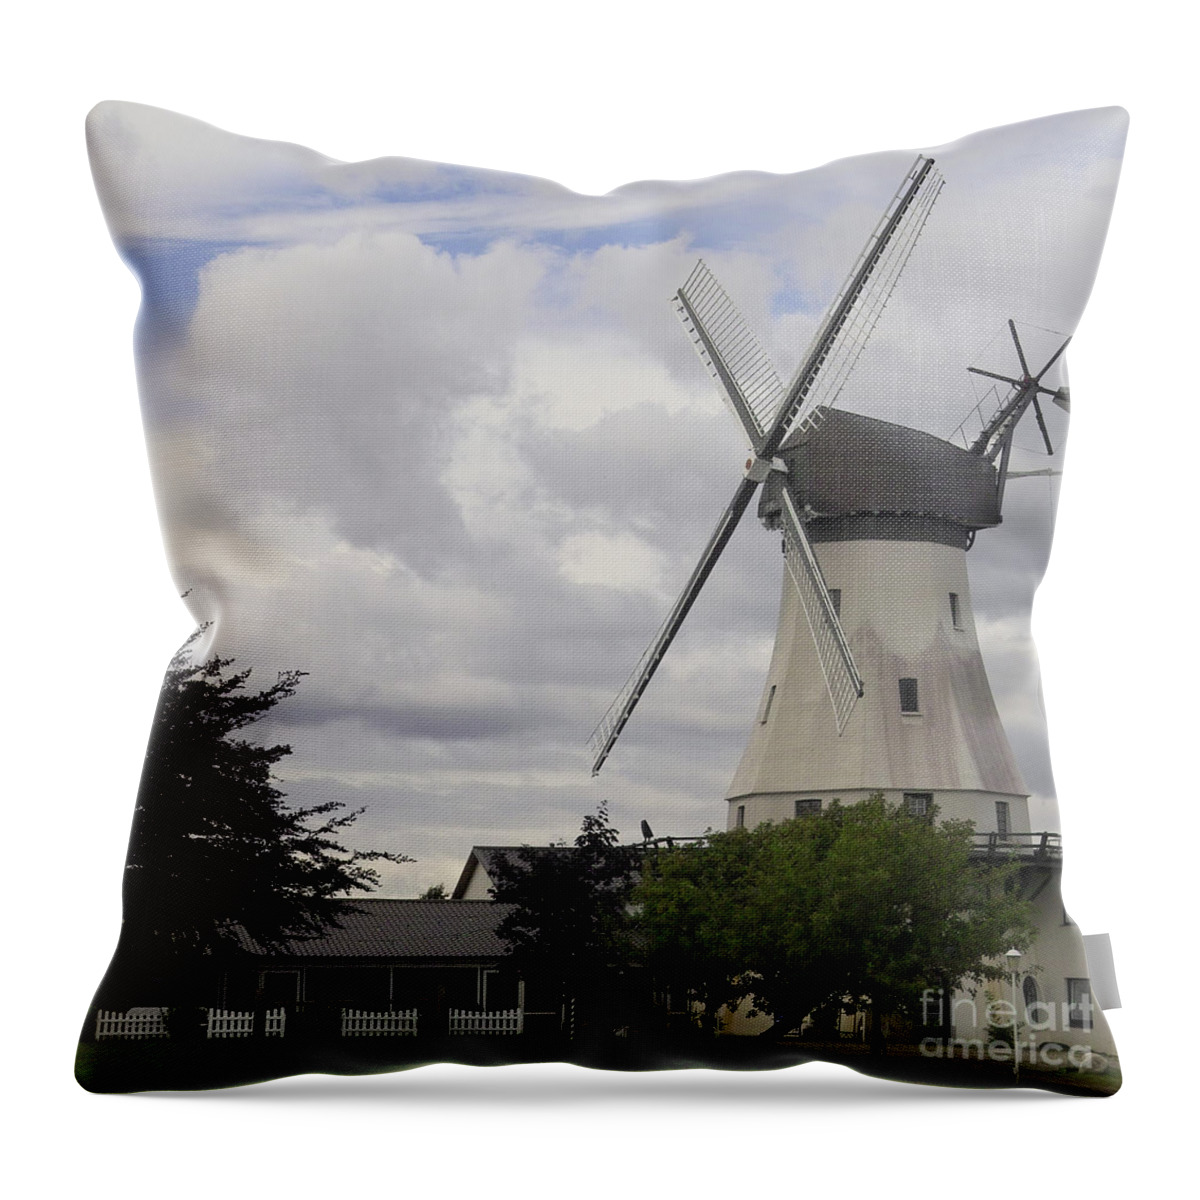 Windmills Throw Pillow featuring the photograph The White Windmill by Heiko Koehrer-Wagner